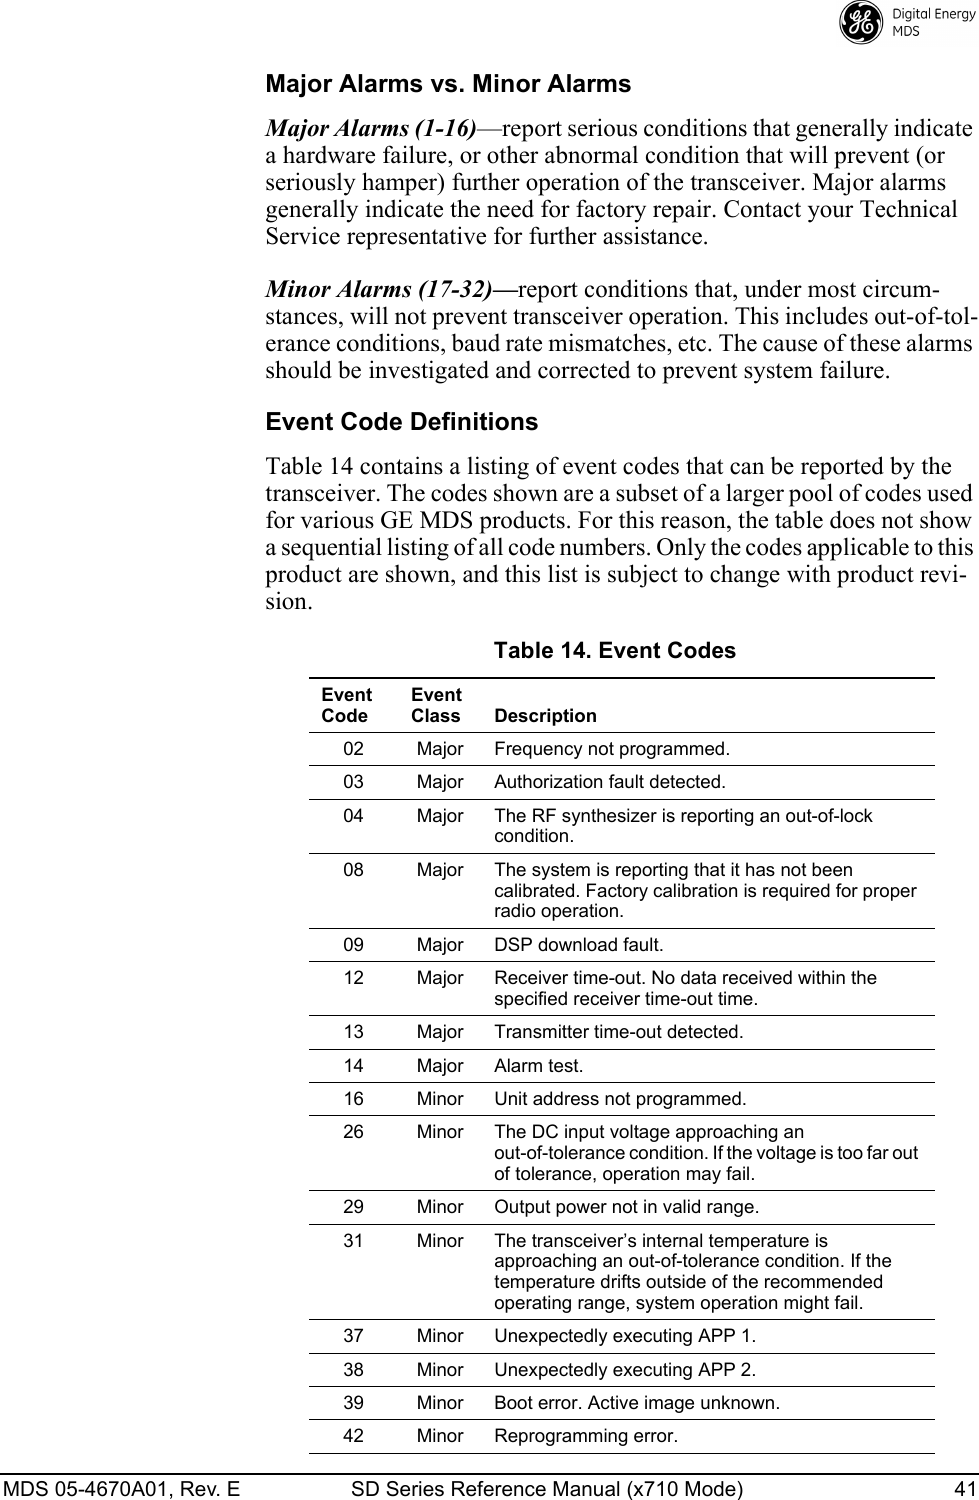 MDS 05-4670A01, Rev. E SD Series Reference Manual (x710 Mode) 41 Major Alarms vs. Minor AlarmsMajor Alarms (1-16)—report serious conditions that generally indicate a hardware failure, or other abnormal condition that will prevent (or seriously hamper) further operation of the transceiver. Major alarms generally indicate the need for factory repair. Contact your Technical Service representative for further assistance.Minor Alarms (17-32)—report conditions that, under most circum-stances, will not prevent transceiver operation. This includes out-of-tol-erance conditions, baud rate mismatches, etc. The cause of these alarms should be investigated and corrected to prevent system failure.Event Code DefinitionsTable 14 contains a listing of event codes that can be reported by the transceiver. The codes shown are a subset of a larger pool of codes used for various GE MDS products. For this reason, the table does not show a sequential listing of all code numbers. Only the codes applicable to this product are shown, and this list is subject to change with product revi-sion. Table 14. Event CodesEvent CodeEvent Class Description02 Major Frequency not programmed.03 Major Authorization fault detected.04 Major The RF synthesizer is reporting an out-of-lock condition.08 Major The system is reporting that it has not been calibrated. Factory calibration is required for proper radio operation.09 Major DSP download fault.12 Major Receiver time-out. No data received within the specified receiver time-out time.13 Major Transmitter time-out detected.14 Major Alarm test.16 Minor Unit address not programmed.26 Minor The DC input voltage approaching an out-of-tolerance condition. If the voltage is too far out of tolerance, operation may fail.29 Minor Output power not in valid range.31 Minor The transceiver’s internal temperature is approaching an out-of-tolerance condition. If the temperature drifts outside of the recommended operating range, system operation might fail.37 Minor Unexpectedly executing APP 1.38 Minor Unexpectedly executing APP 2.39 Minor Boot error. Active image unknown.42 Minor Reprogramming error.